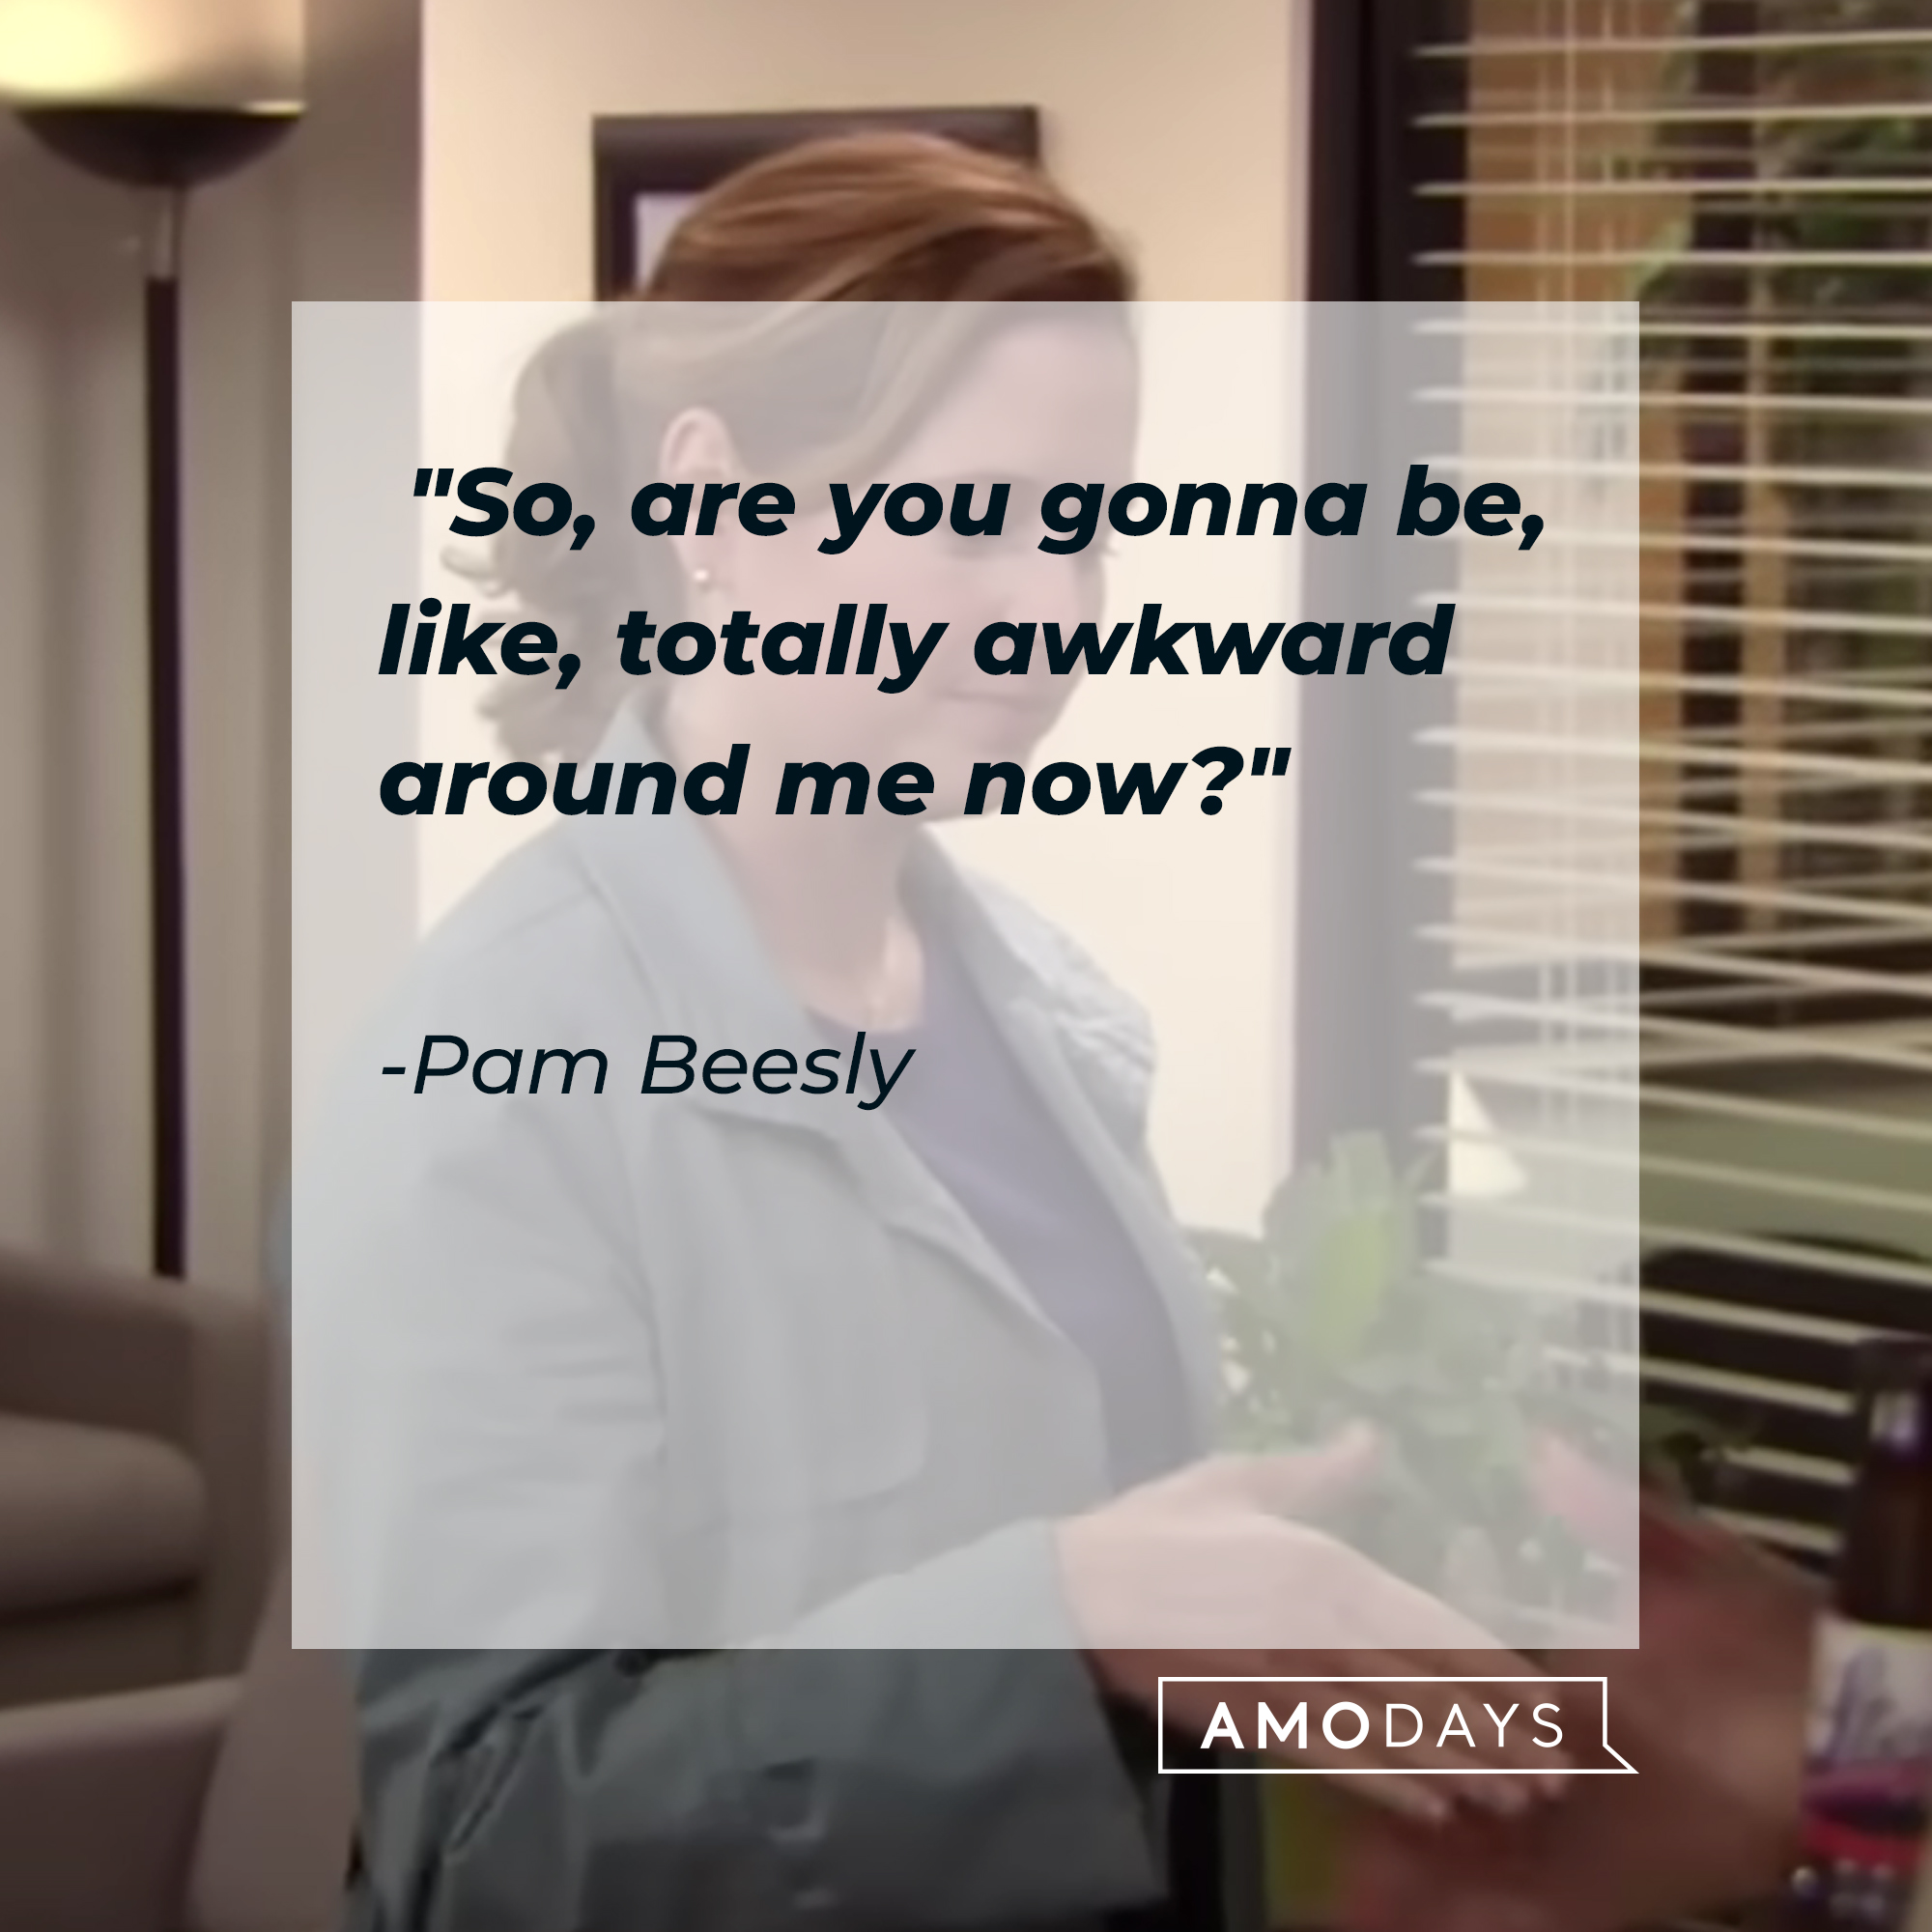 Pam Beesly's quote:  "So, are you gonna be, like, totally awkward around me now?" | Source: YouTube/TheOffice